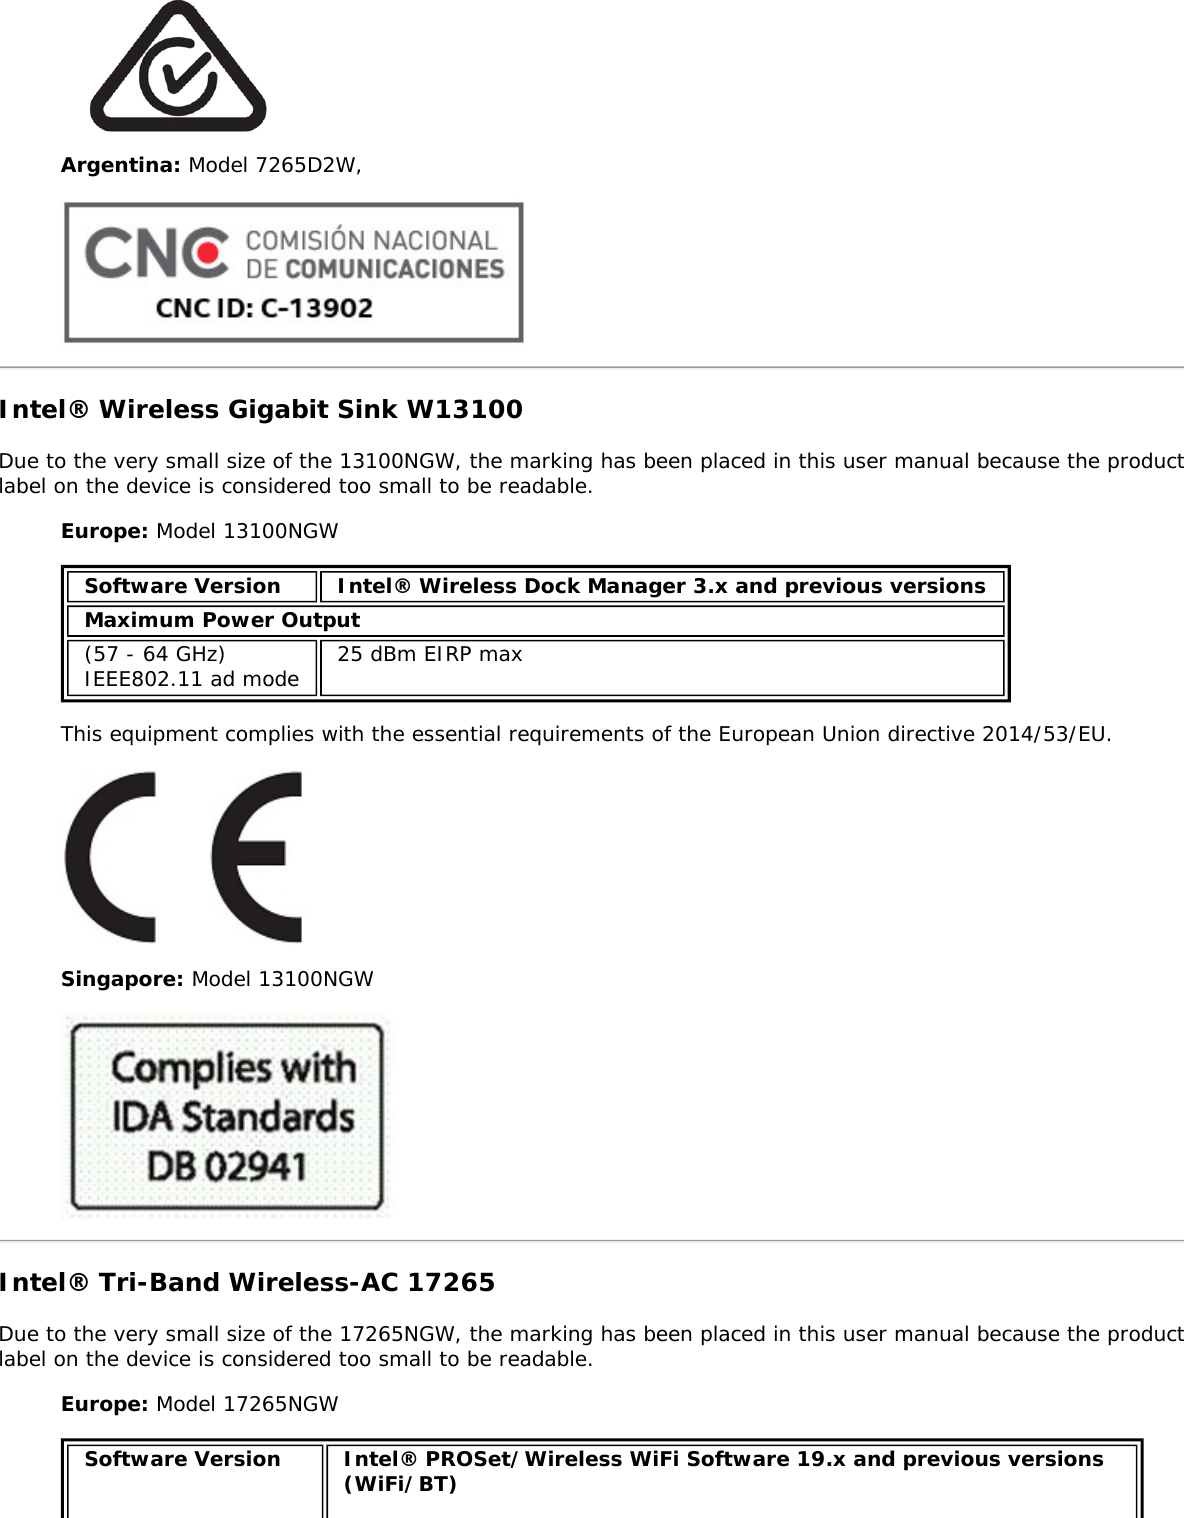 Argentina: Model 7265D2W,Intel® Wireless Gigabit Sink W13100Due to the very small size of the 13100NGW, the marking has been placed in this user manual because the productlabel on the device is considered too small to be readable.Europe: Model 13100NGWSoftware Version Intel® Wireless Dock Manager 3.x and previous versionsMaximum Power Output(57 - 64 GHz)IEEE802.11 ad mode 25 dBm EIRP maxThis equipment complies with the essential requirements of the European Union directive 2014/53/EU.Singapore: Model 13100NGWIntel® Tri-Band Wireless-AC 17265Due to the very small size of the 17265NGW, the marking has been placed in this user manual because the productlabel on the device is considered too small to be readable.Europe: Model 17265NGWSoftware Version Intel® PROSet/Wireless WiFi Software 19.x and previous versions(WiFi/BT)